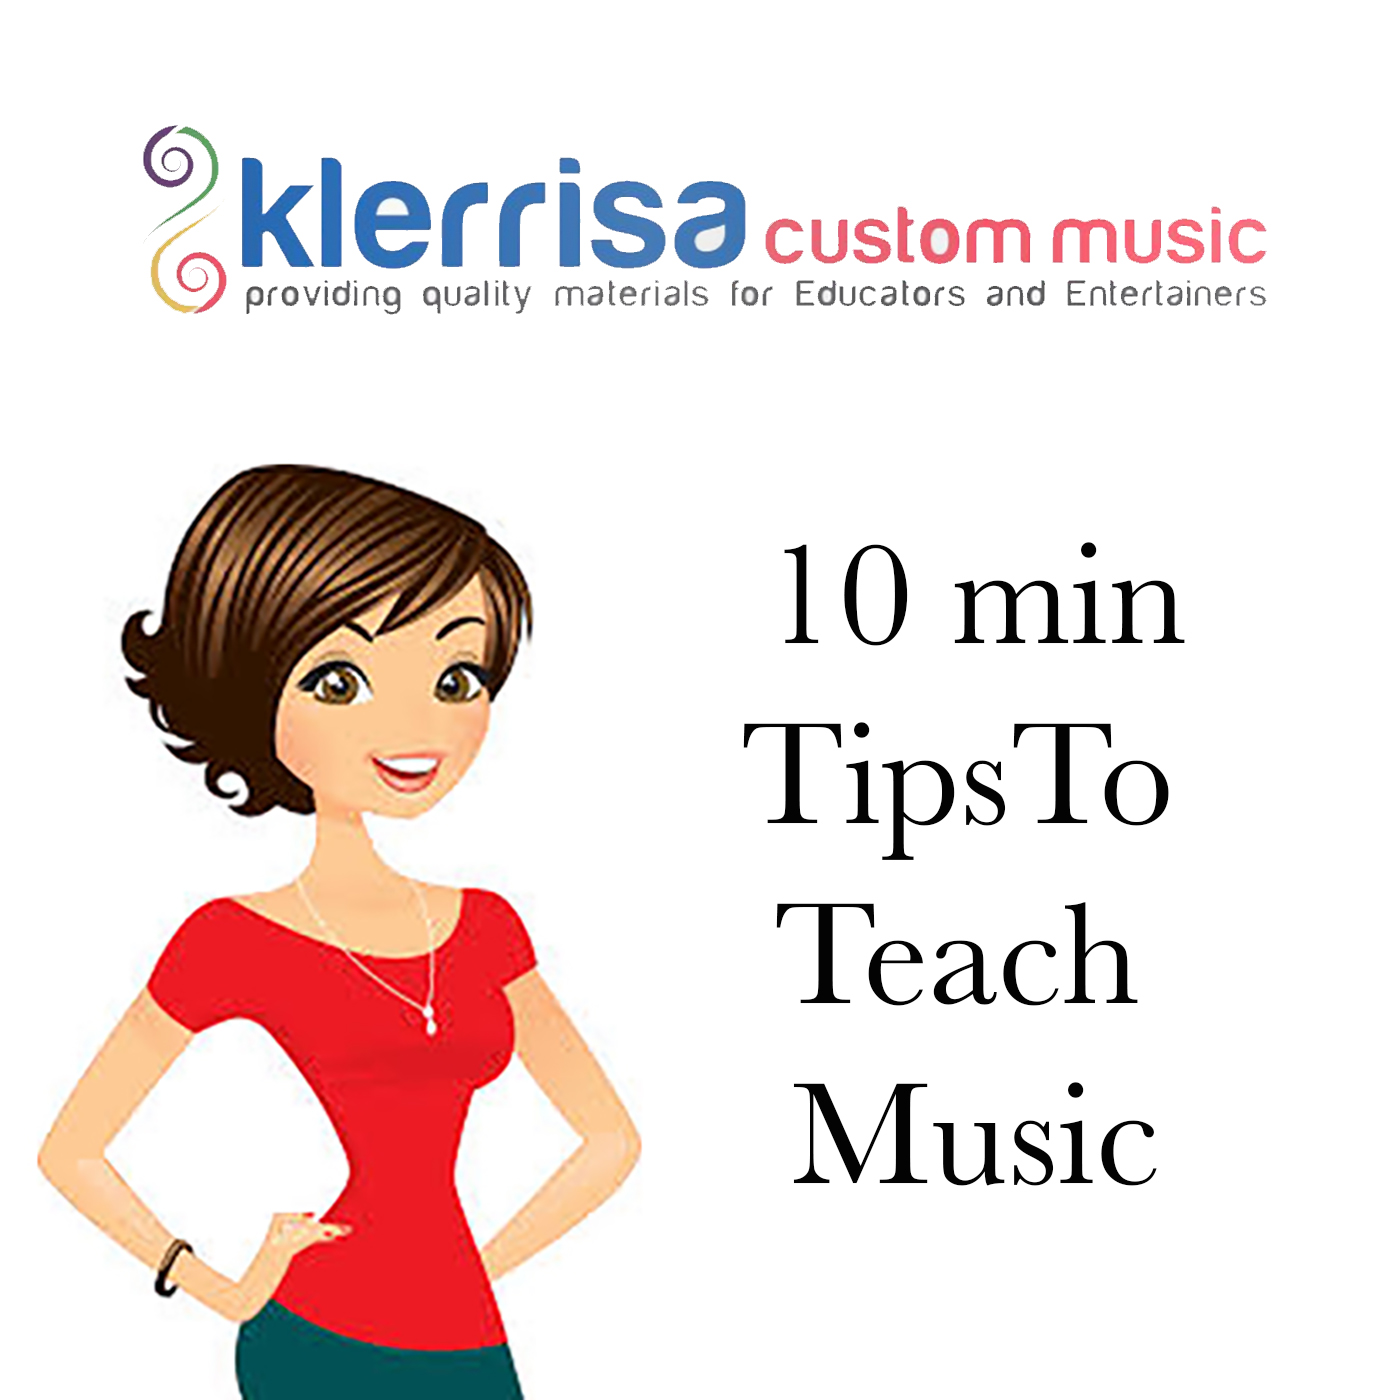 EP 3: HSC Music 2 Tip  - Key words and assumed knowledge